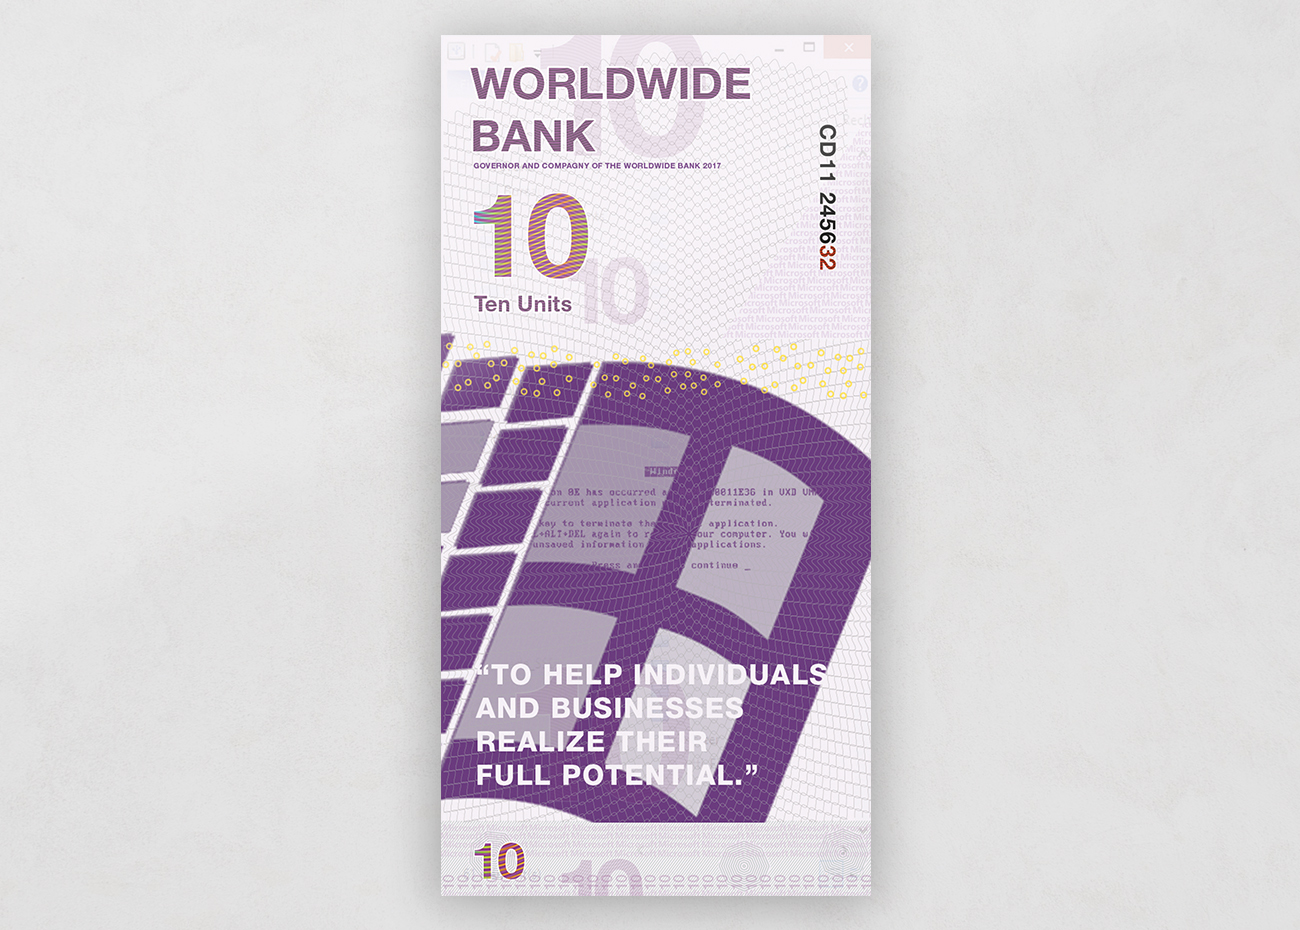 What Does A Brand Currency Look Like?